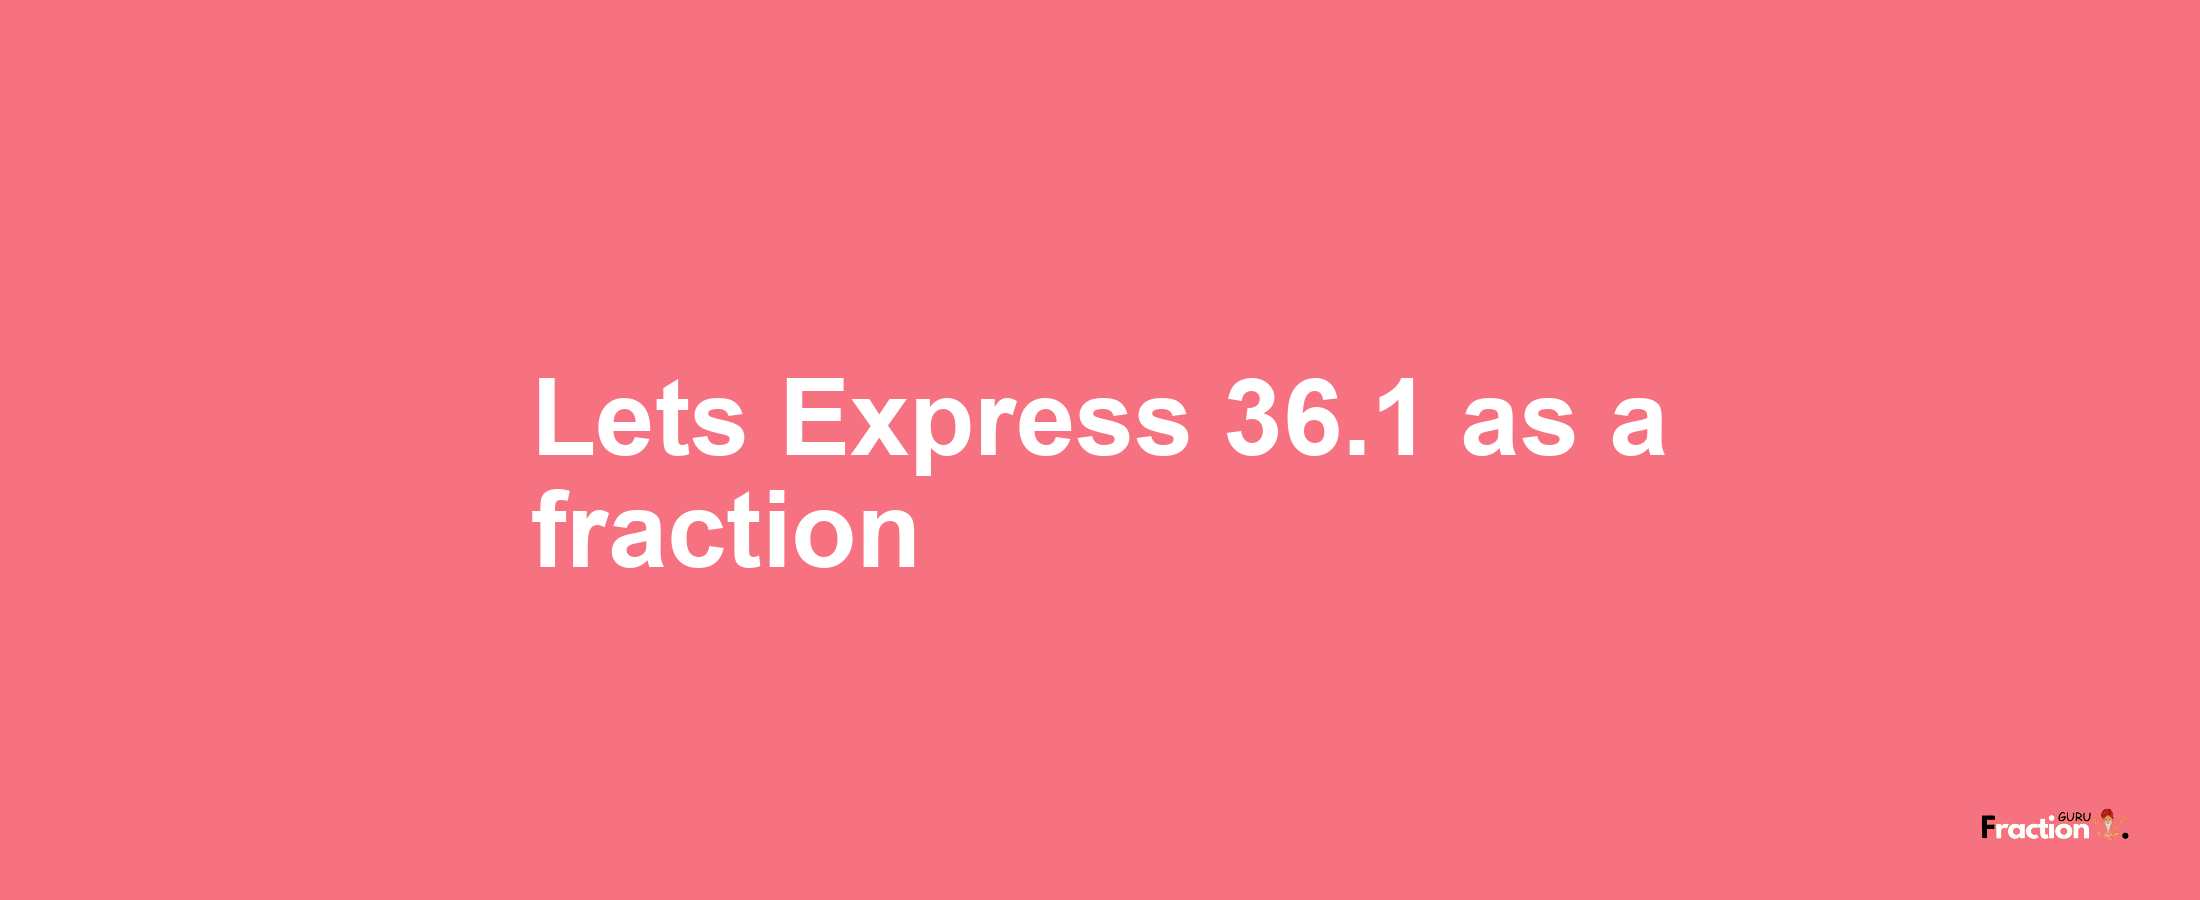 Lets Express 36.1 as afraction